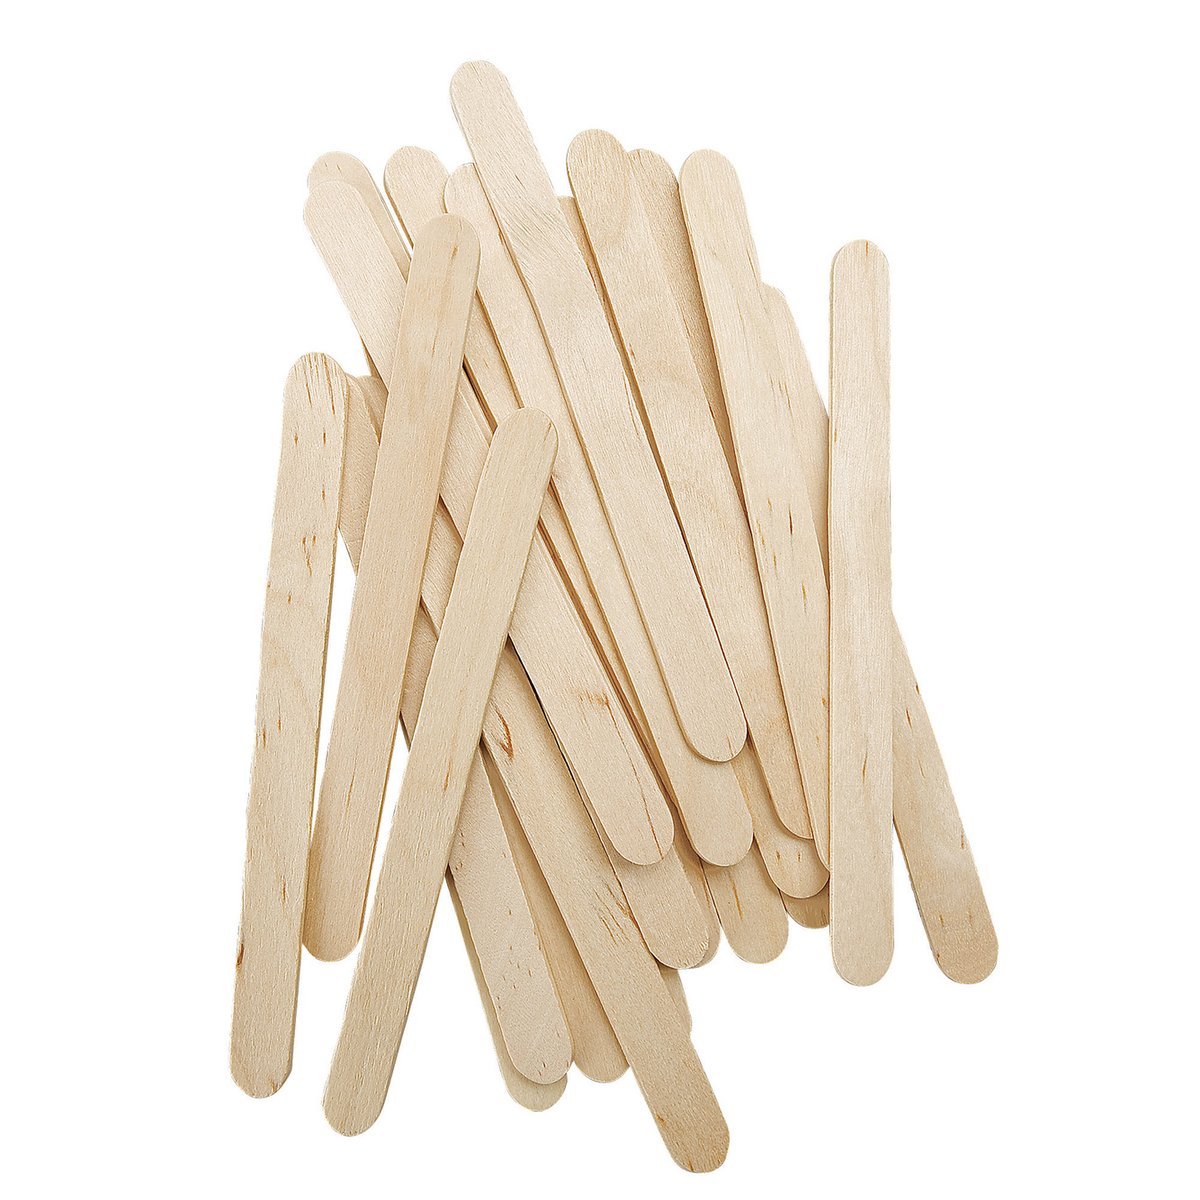 Staedter Städter Wooden Sticks Set Of 100 Approx. 11 Cm For Lollies / Cakes